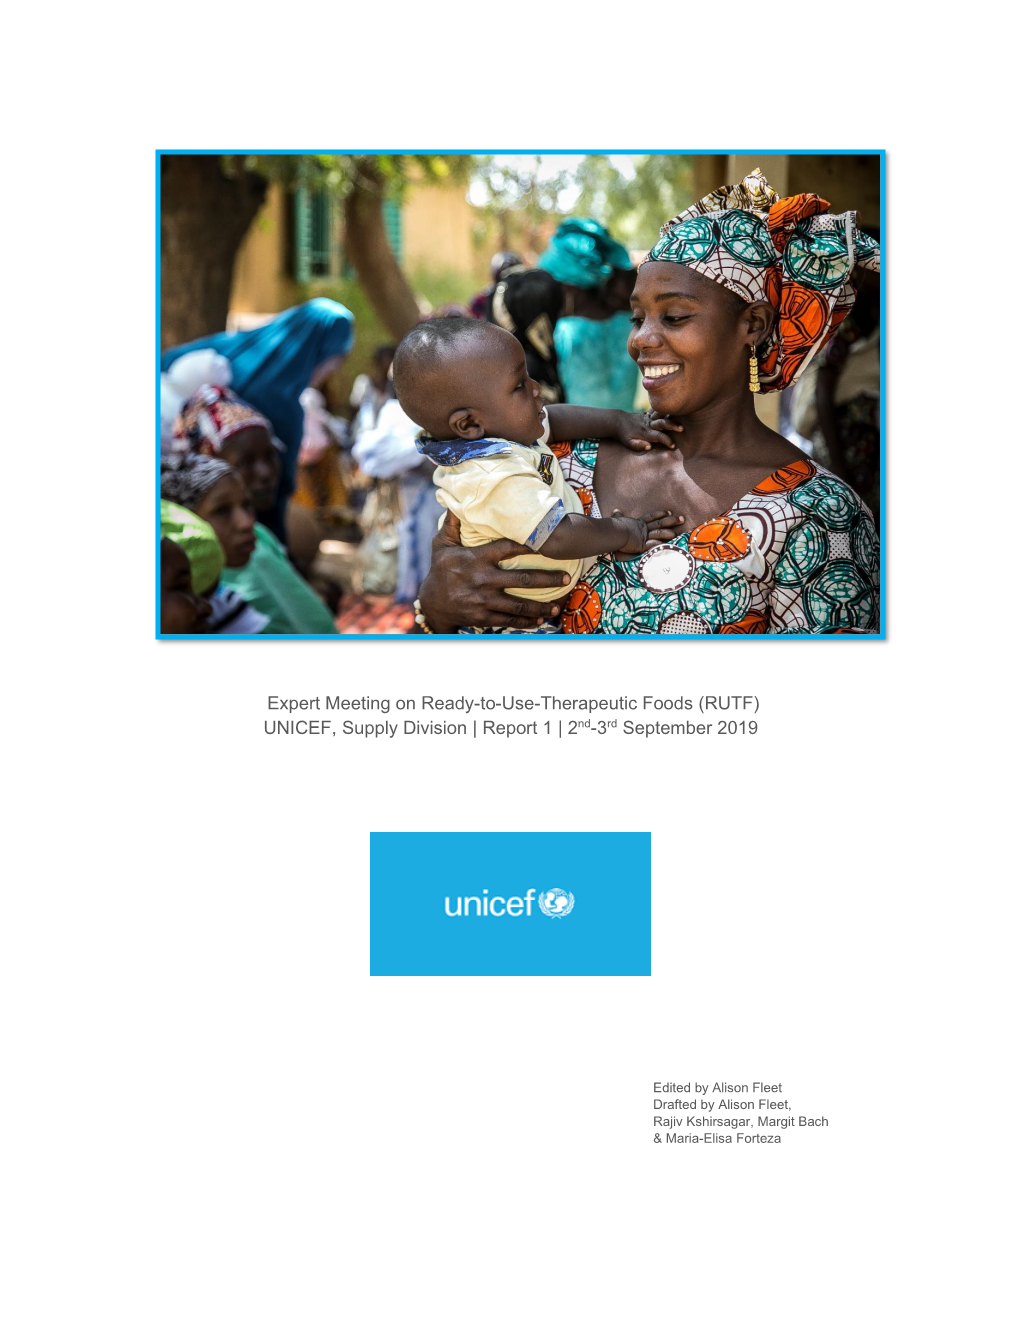 RUTF) UNICEF, Supply Division | Report 1 | 2Nd-3Rd September 2019